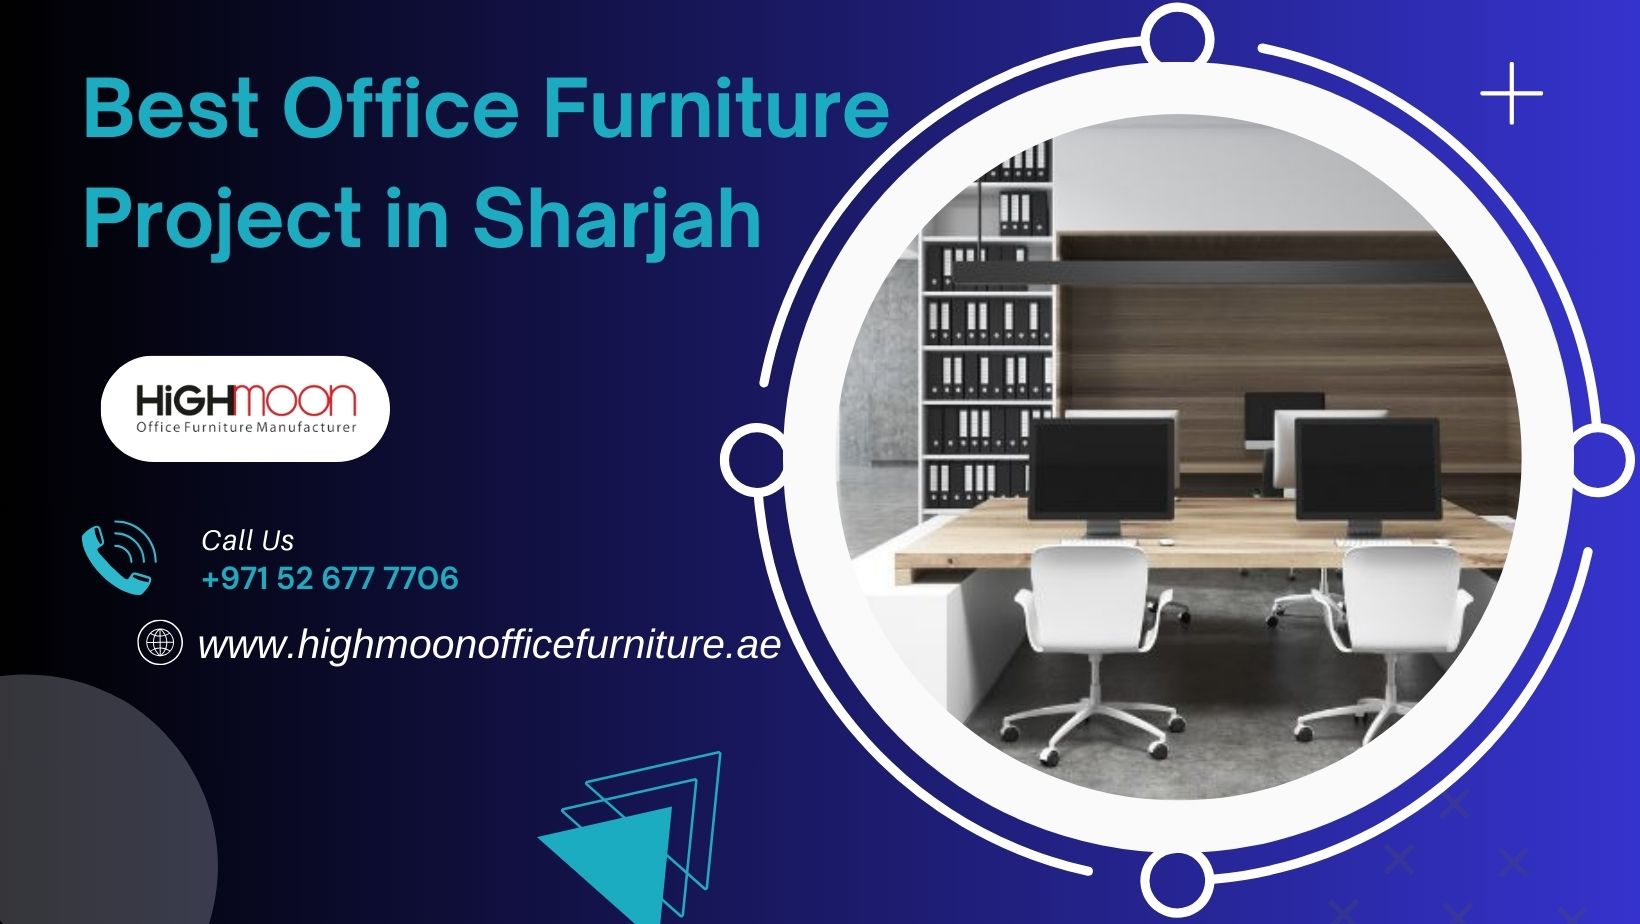 Best Office Furniture Project in Sharjah